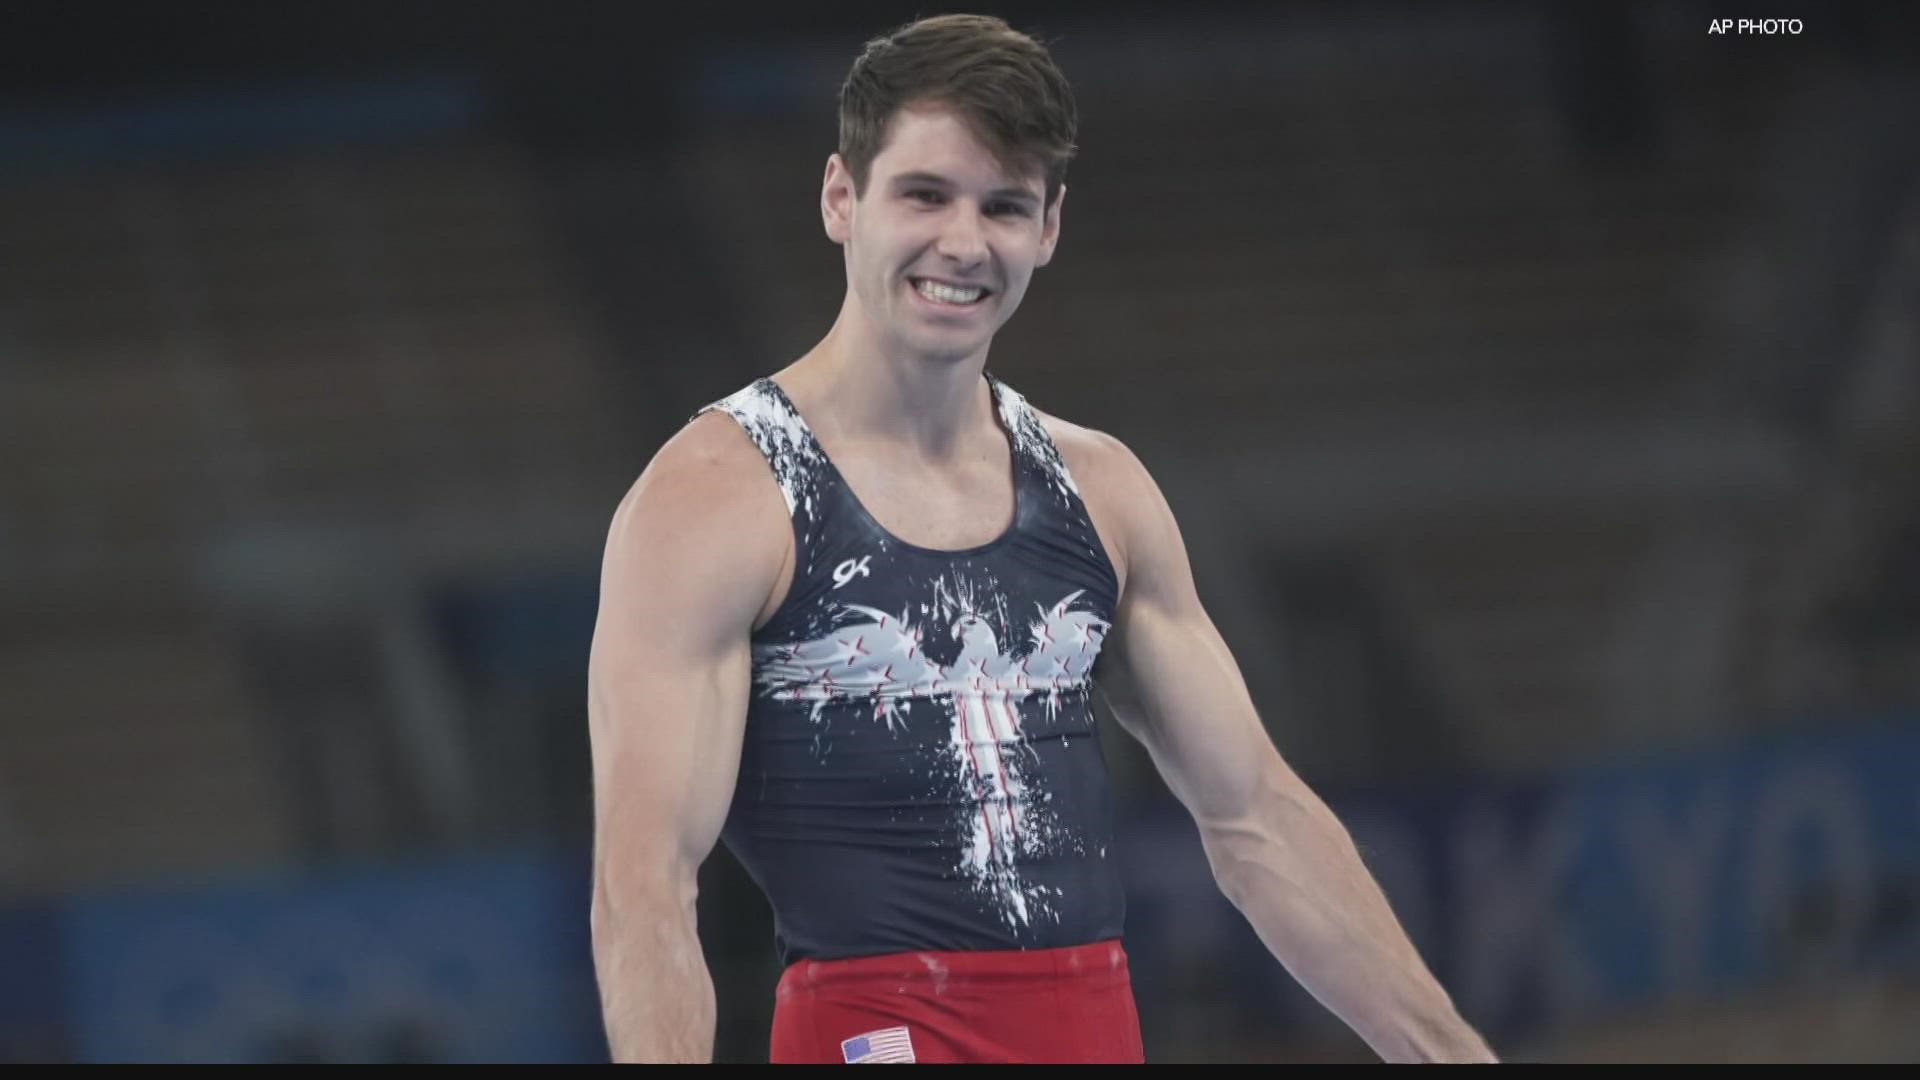 Yoder will go for gold Sunday in Tokyo.